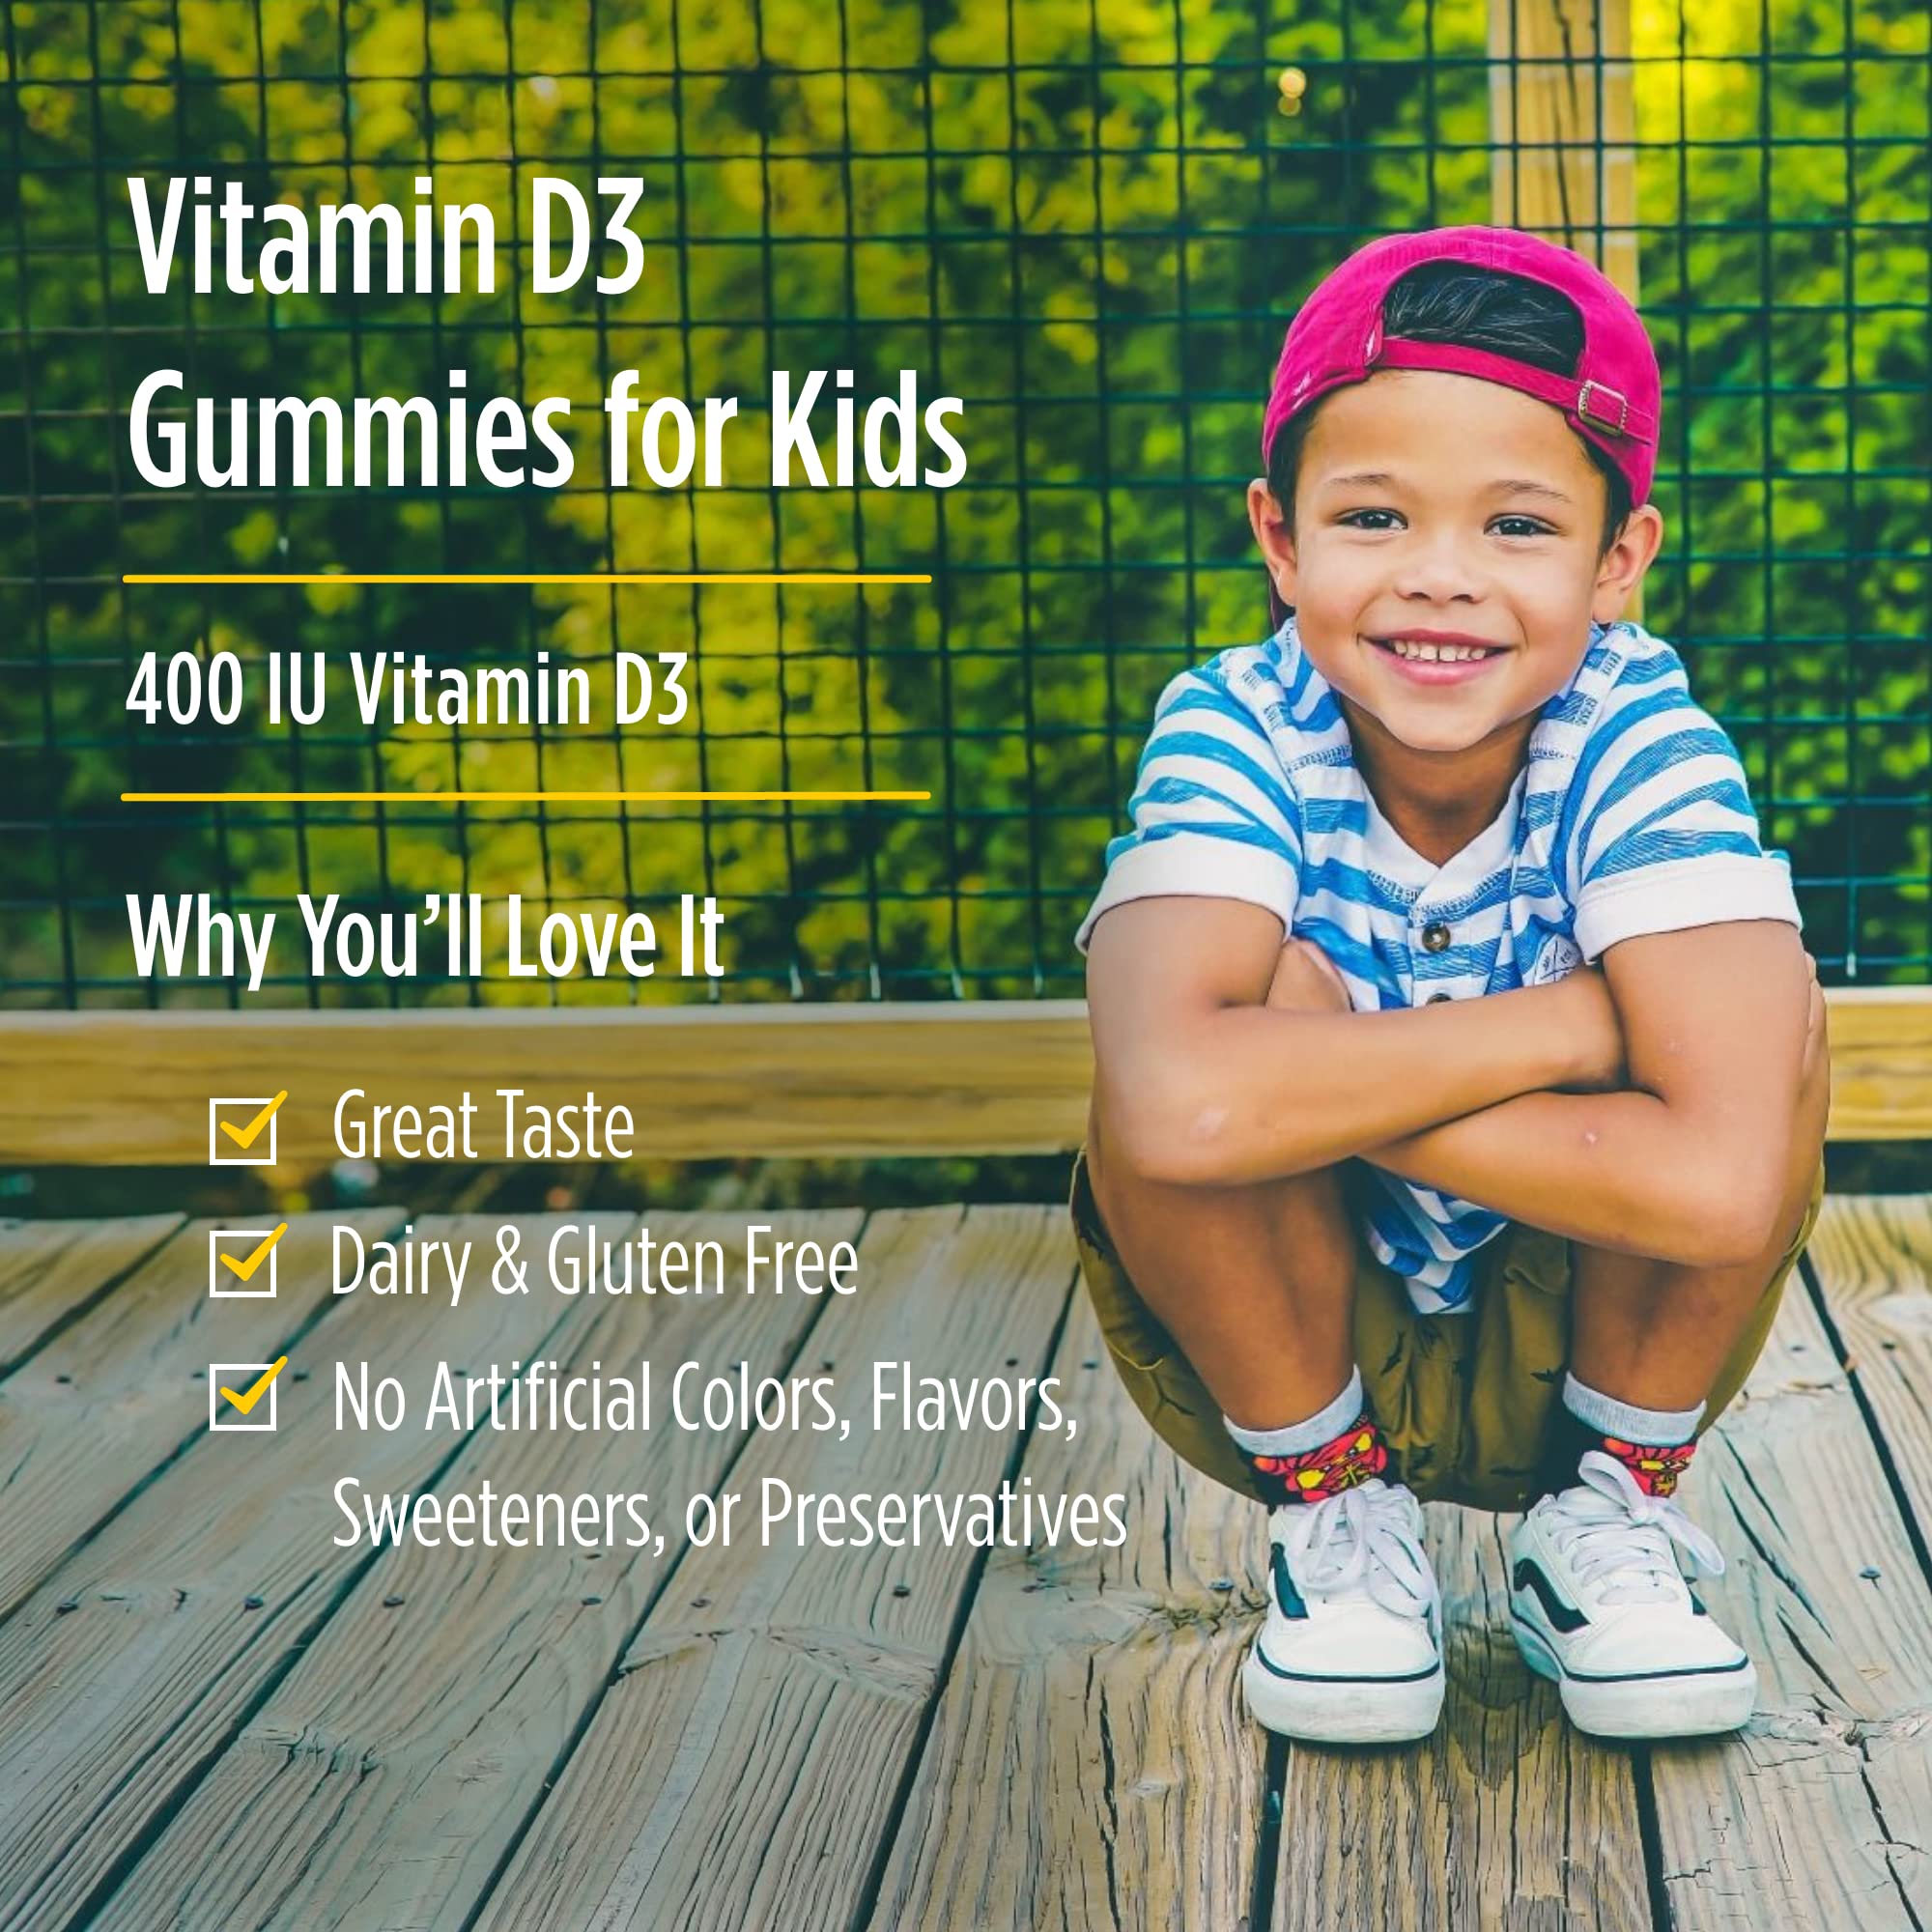 Nordic Naturals Vitamin D3 Gummies - Chewable Vitamin D Gummy For Kids, 400 IU of Vitamin D Supports Immune System, Mood, Sleep and More, Watermelon Flavor, 60 Count